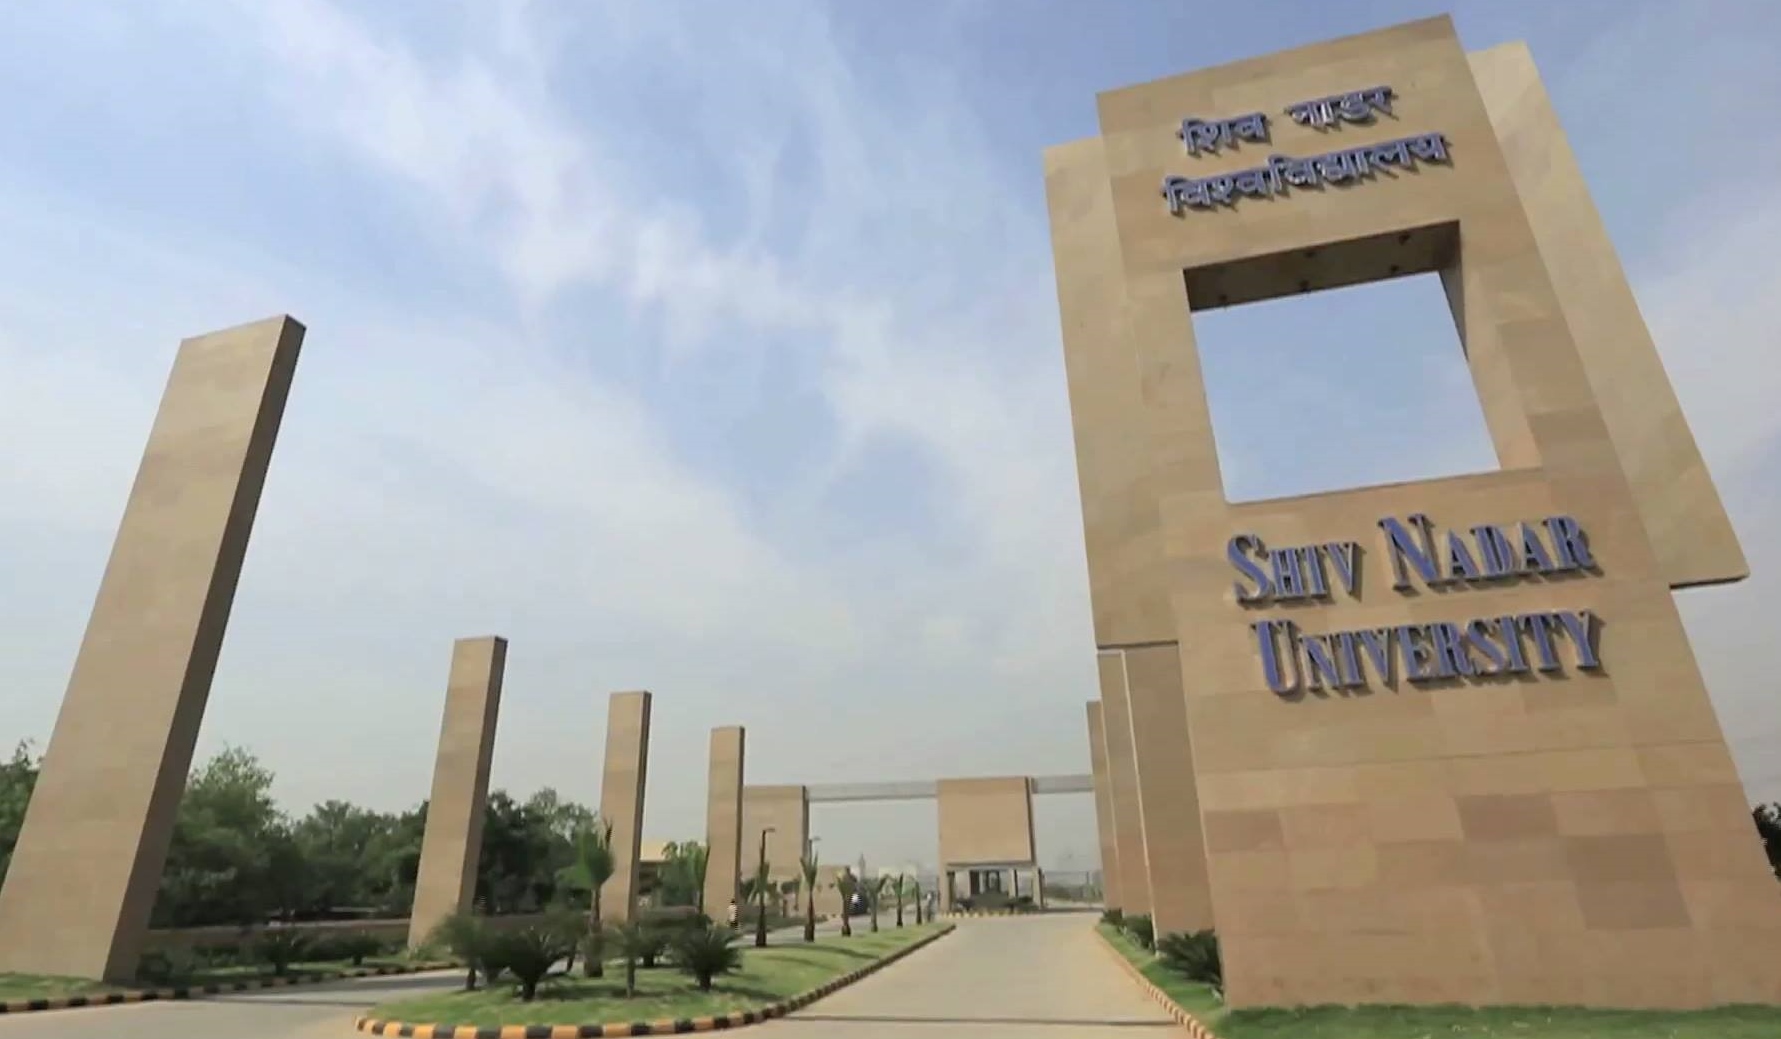 Shiv Nadar Foundation announced university in Chennai; admission starts from April 2021